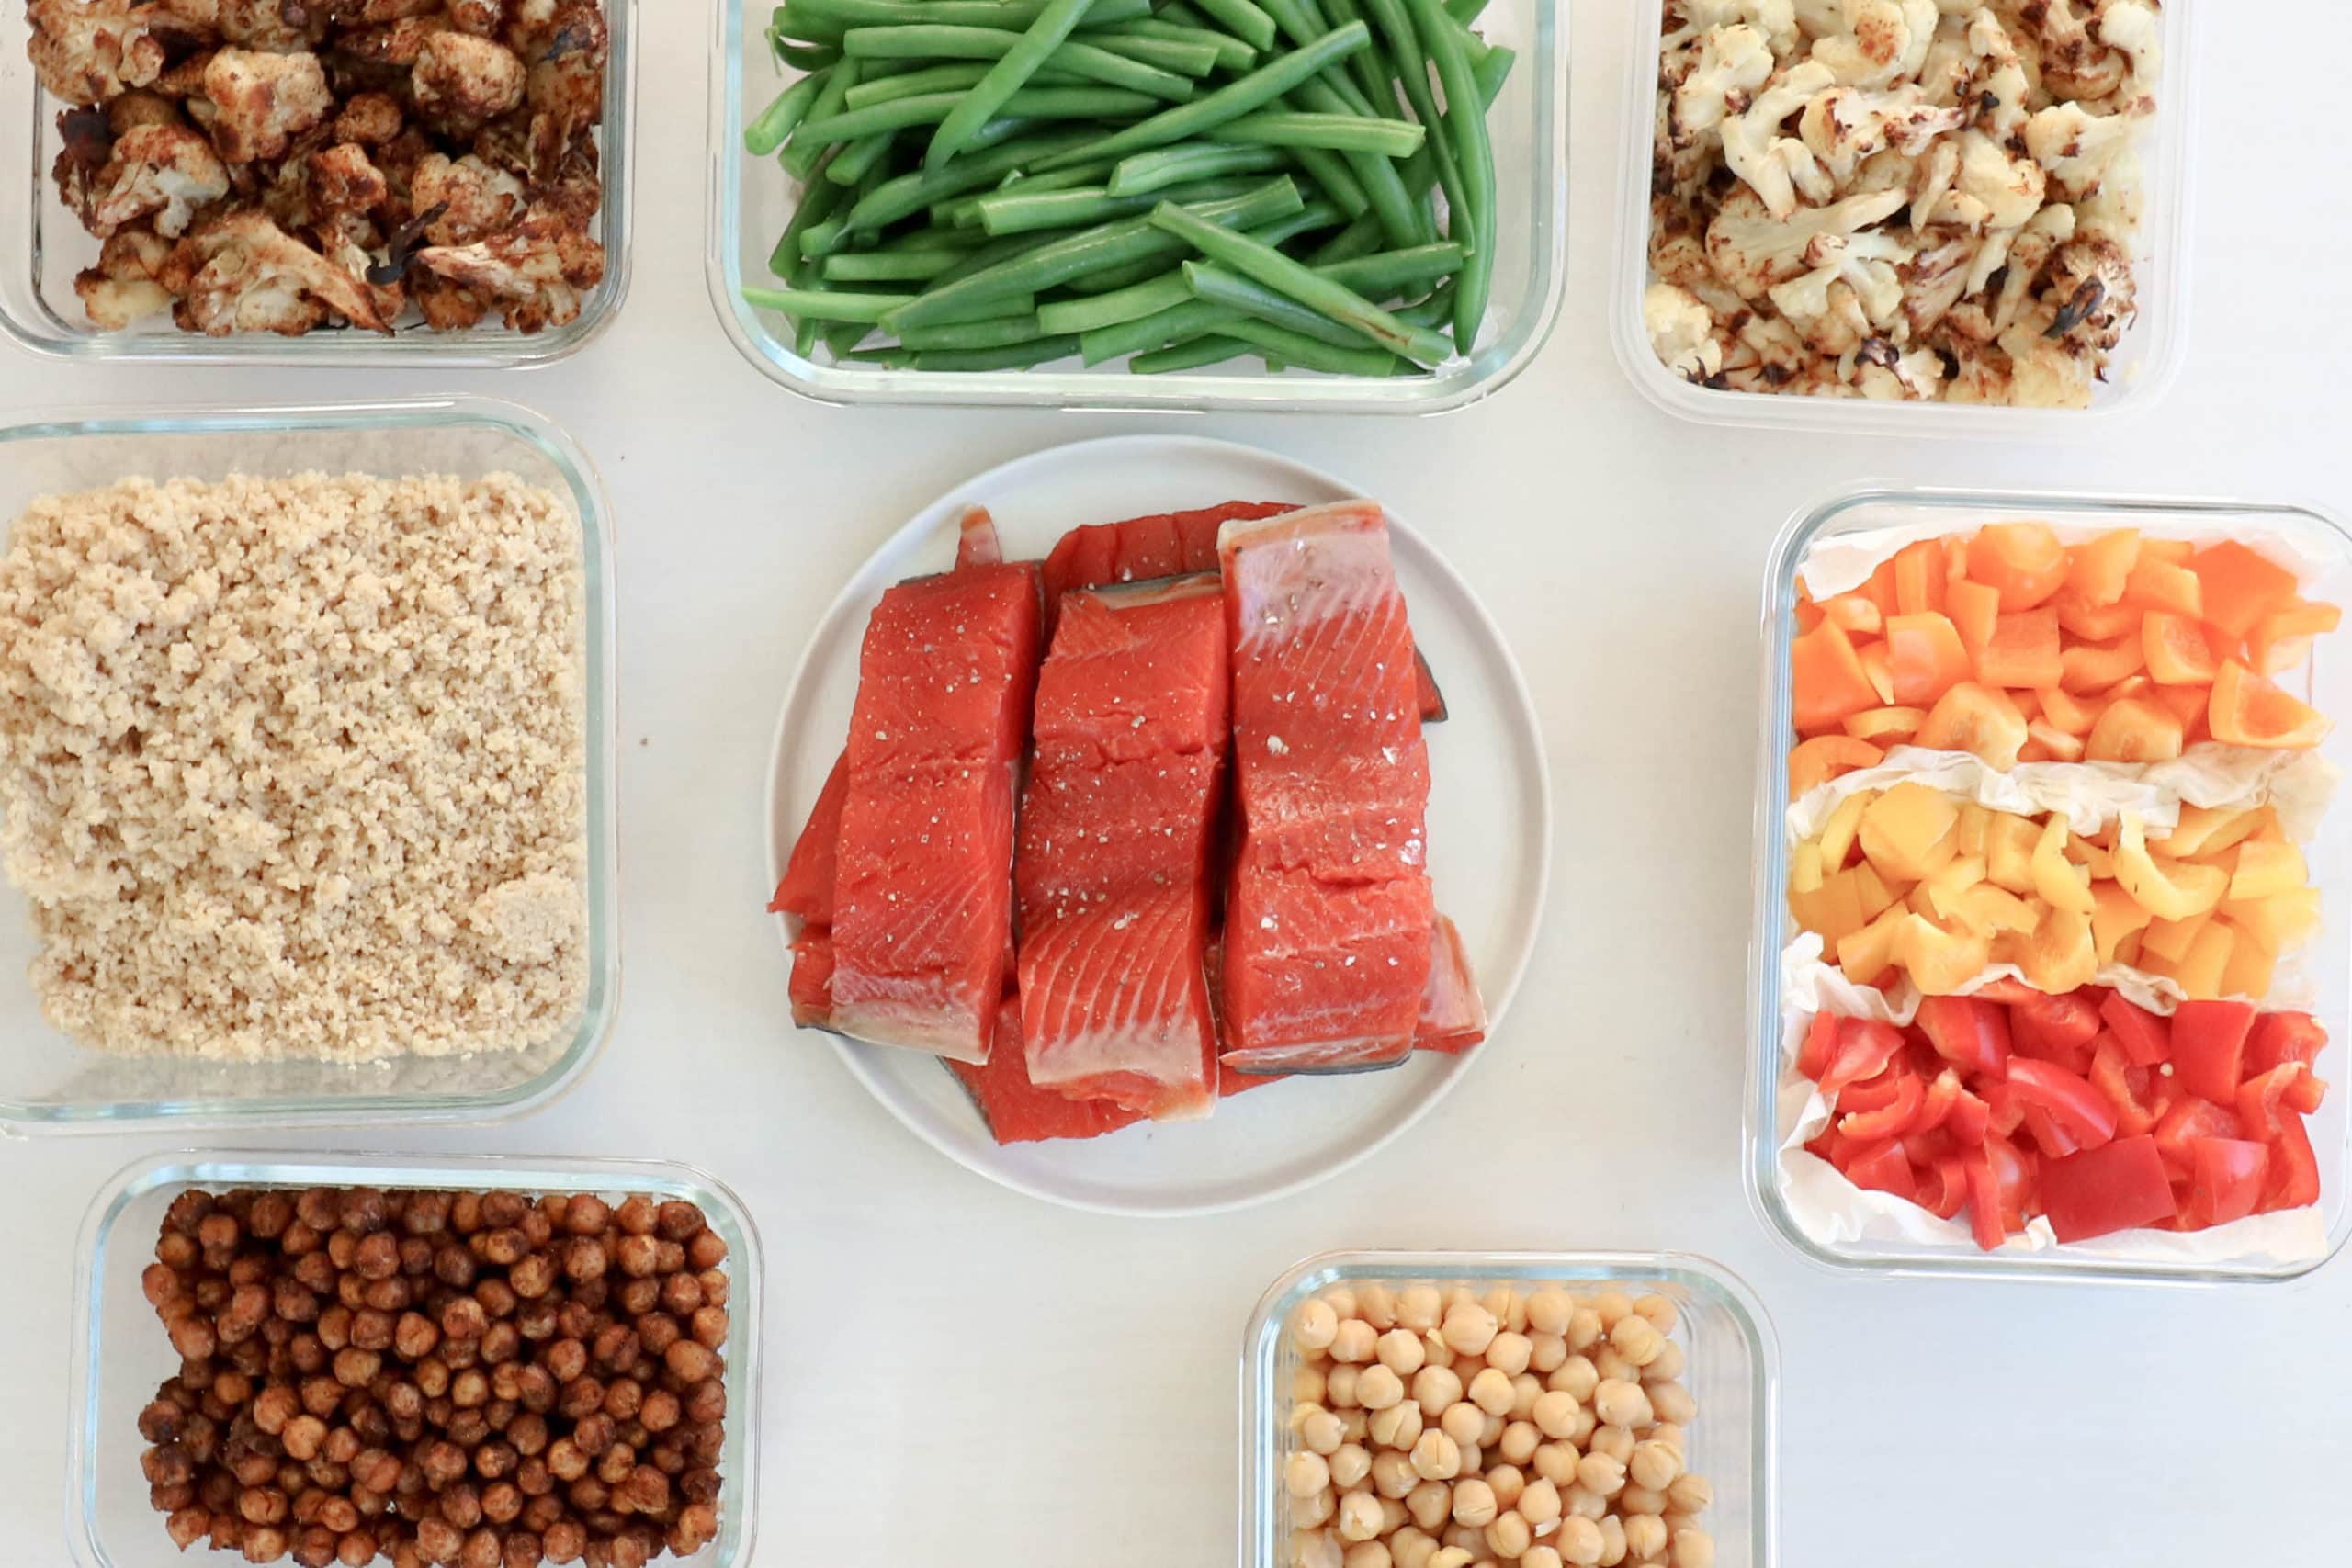 Meal Prepping Made Easy in 4 Simple Steps - Apex MD